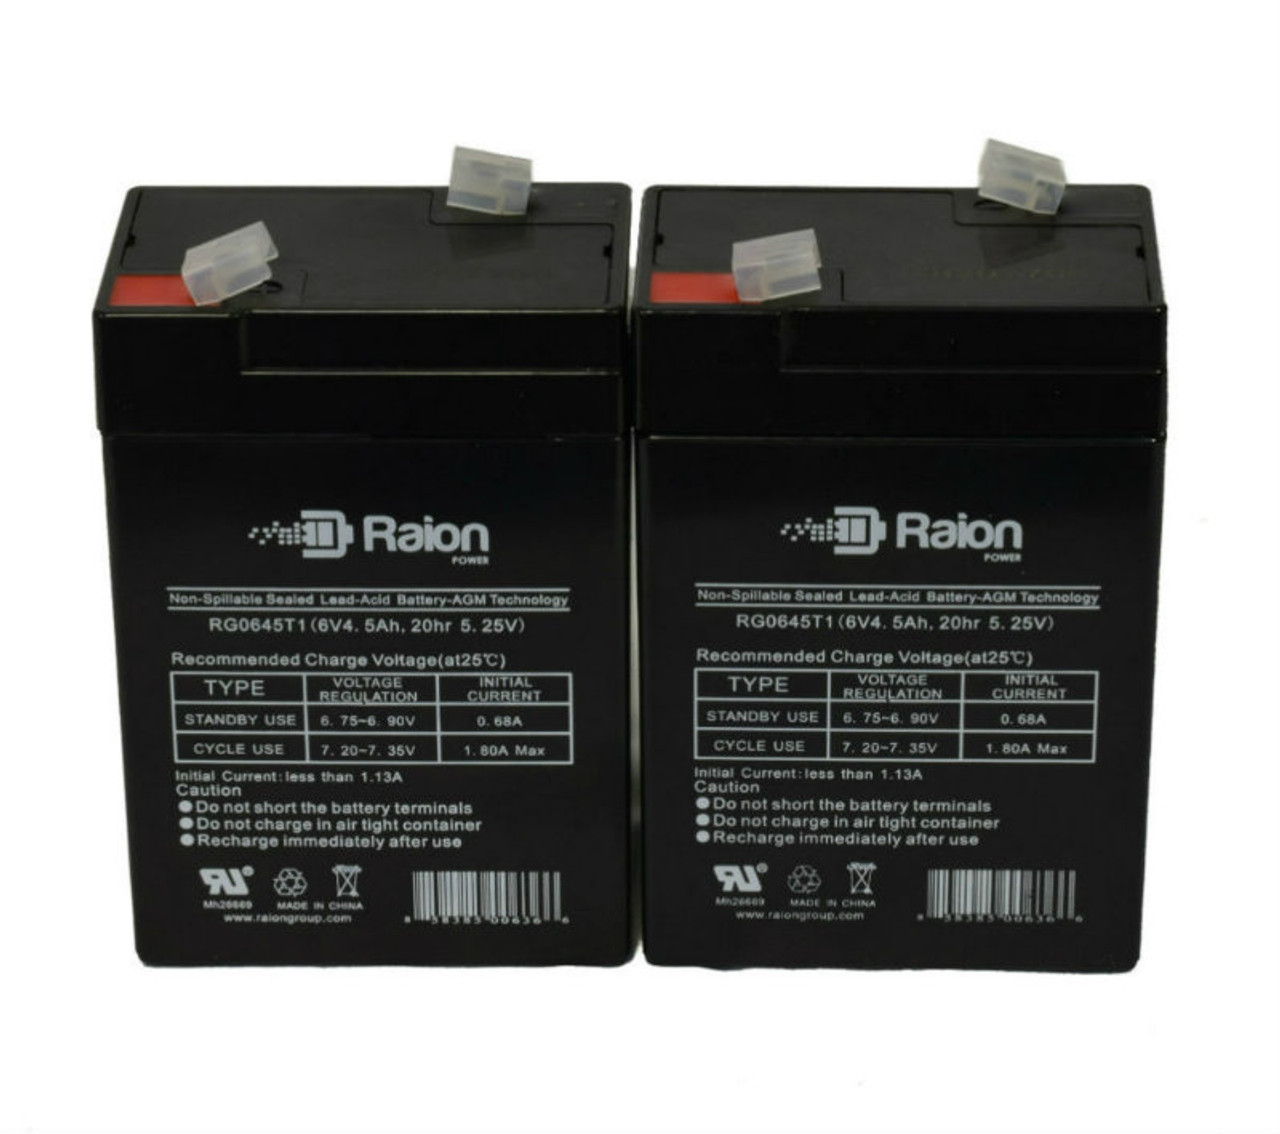 Raion Power RG0645T1 6V 4.5Ah Replacement Medical Equipment Battery for Abbott Laboratories Life Care 1000 - 2 Pack